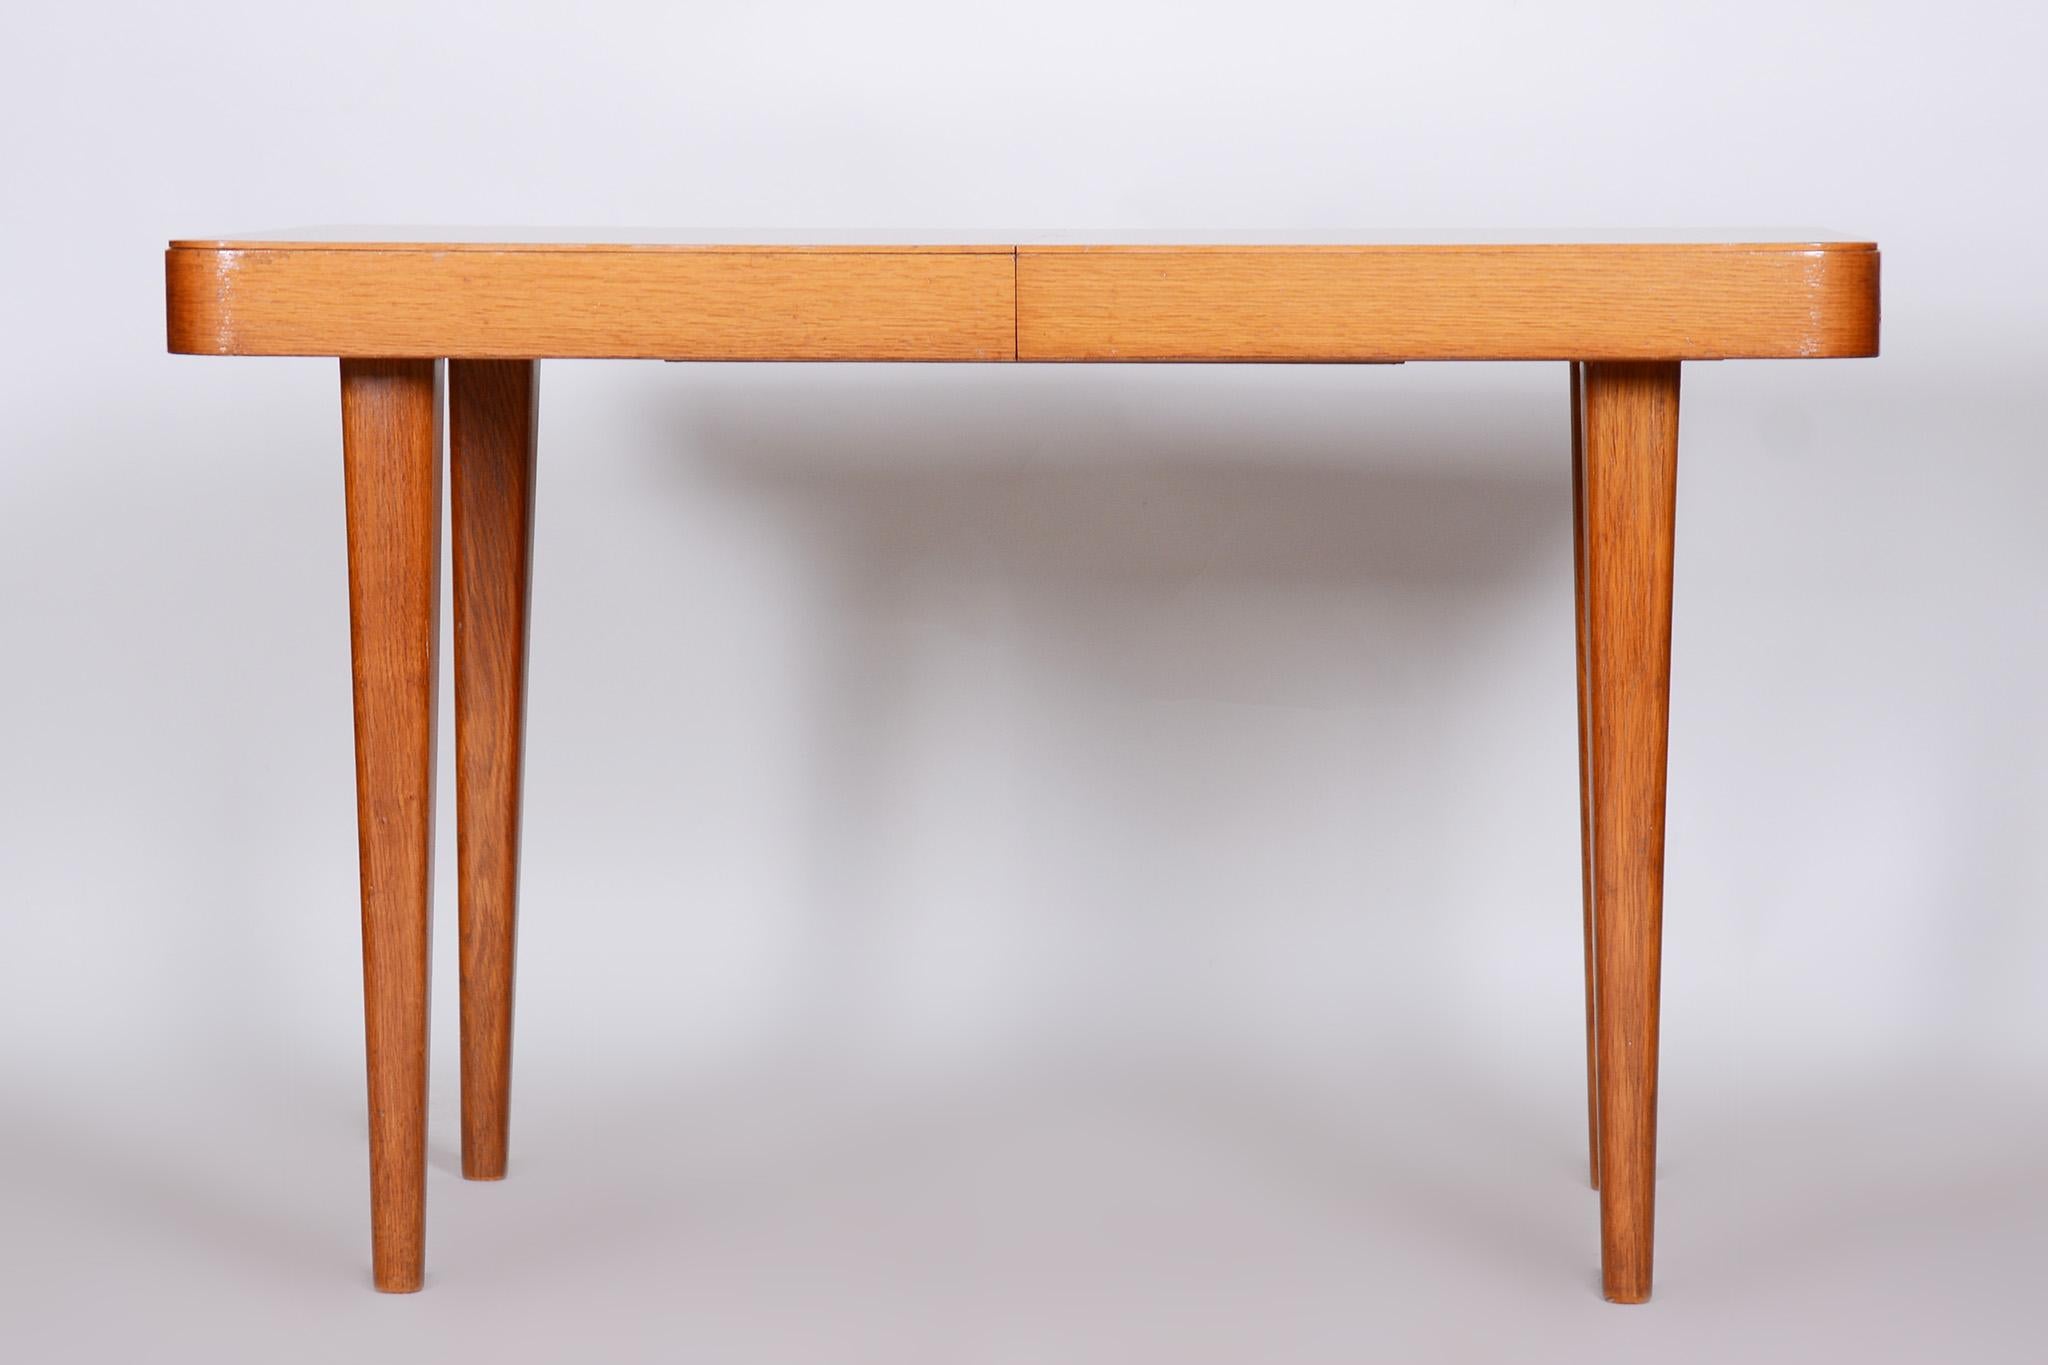 Completely restored Art Deco table.
Revived polish

Adjustable width: 121 cm - 163 cm (47.6 in - 64.2 in).